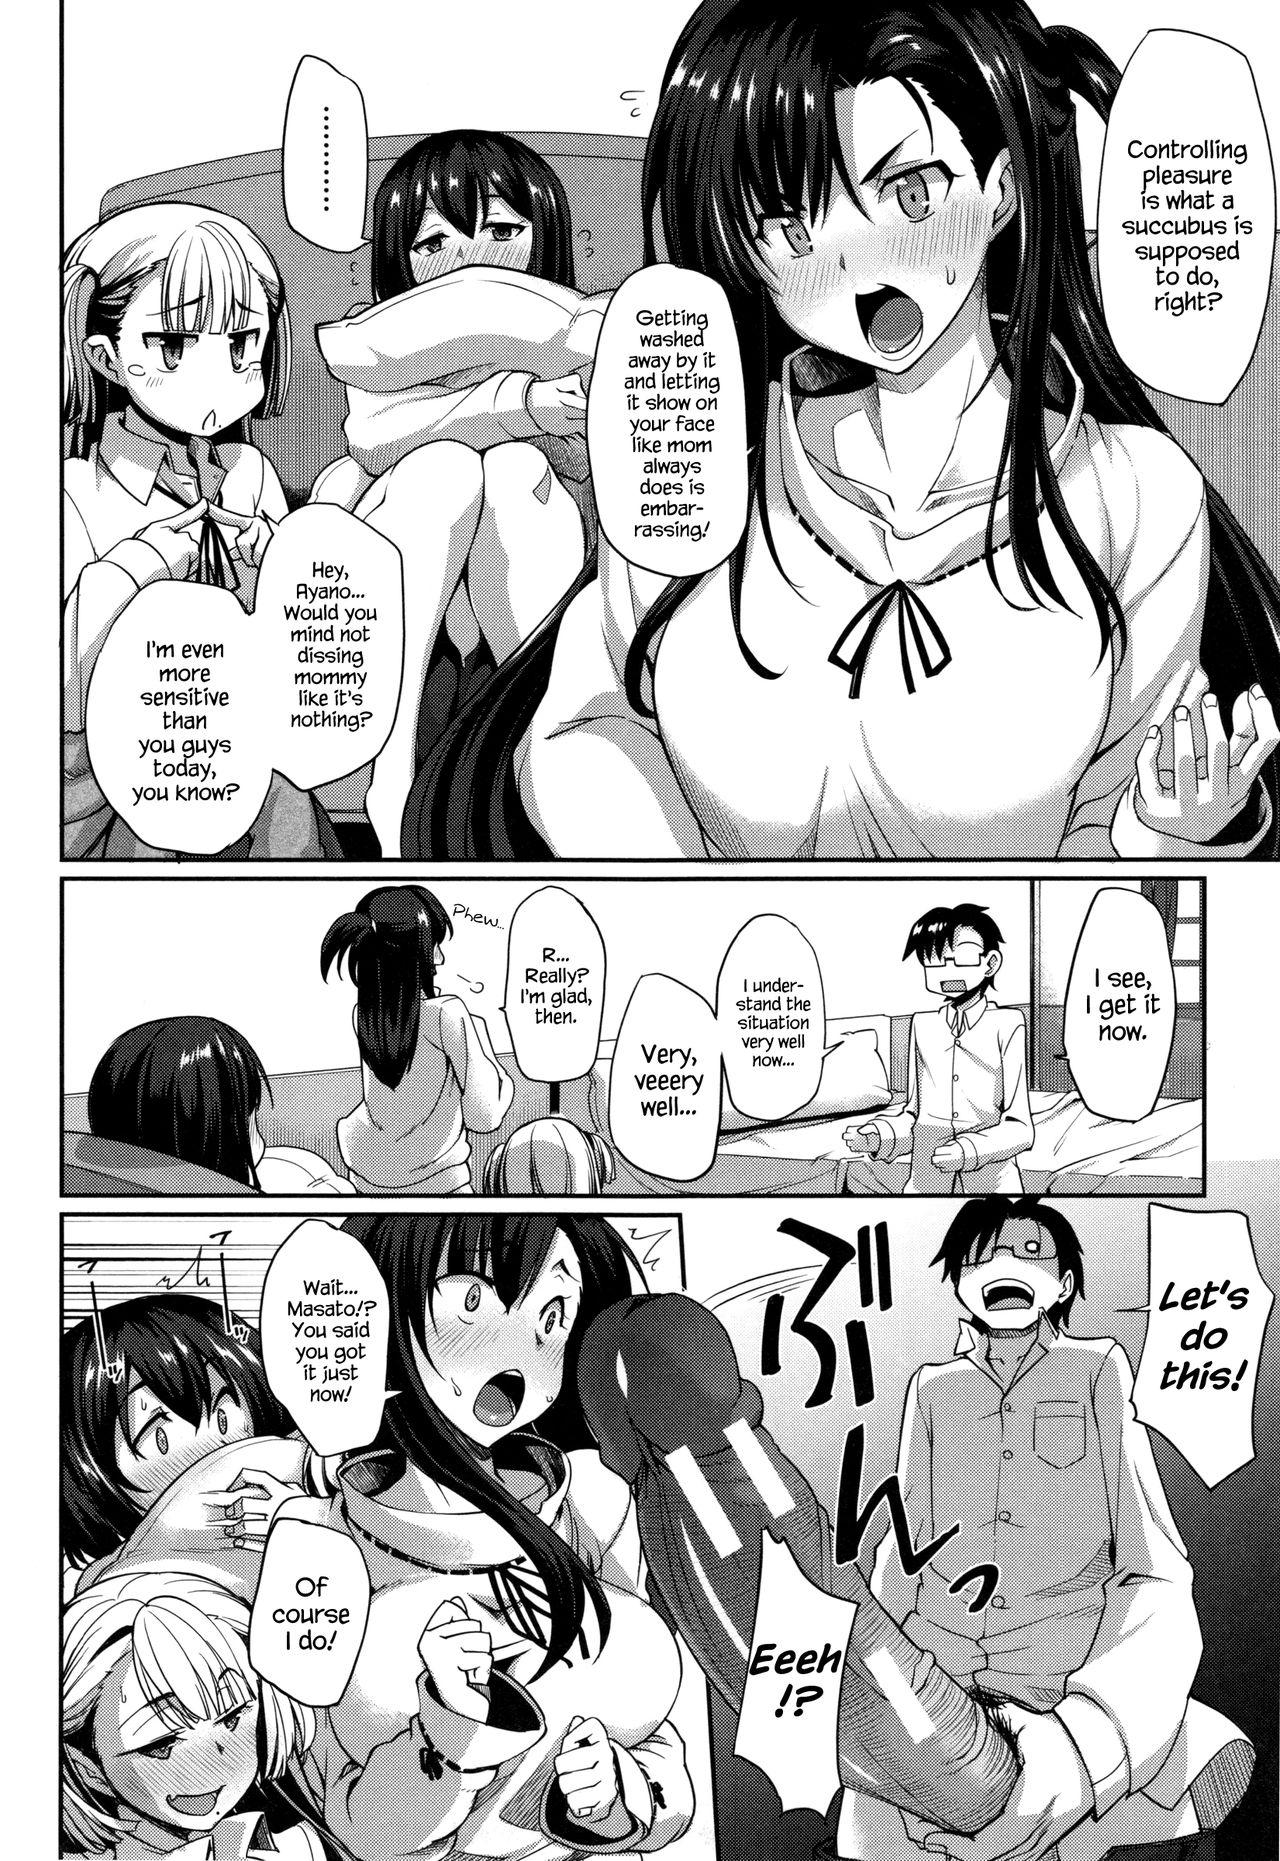 Amateur Pussy Inma no Mikata! | Succubi’s Supporter! Ch. 6 Ballbusting - Page 4